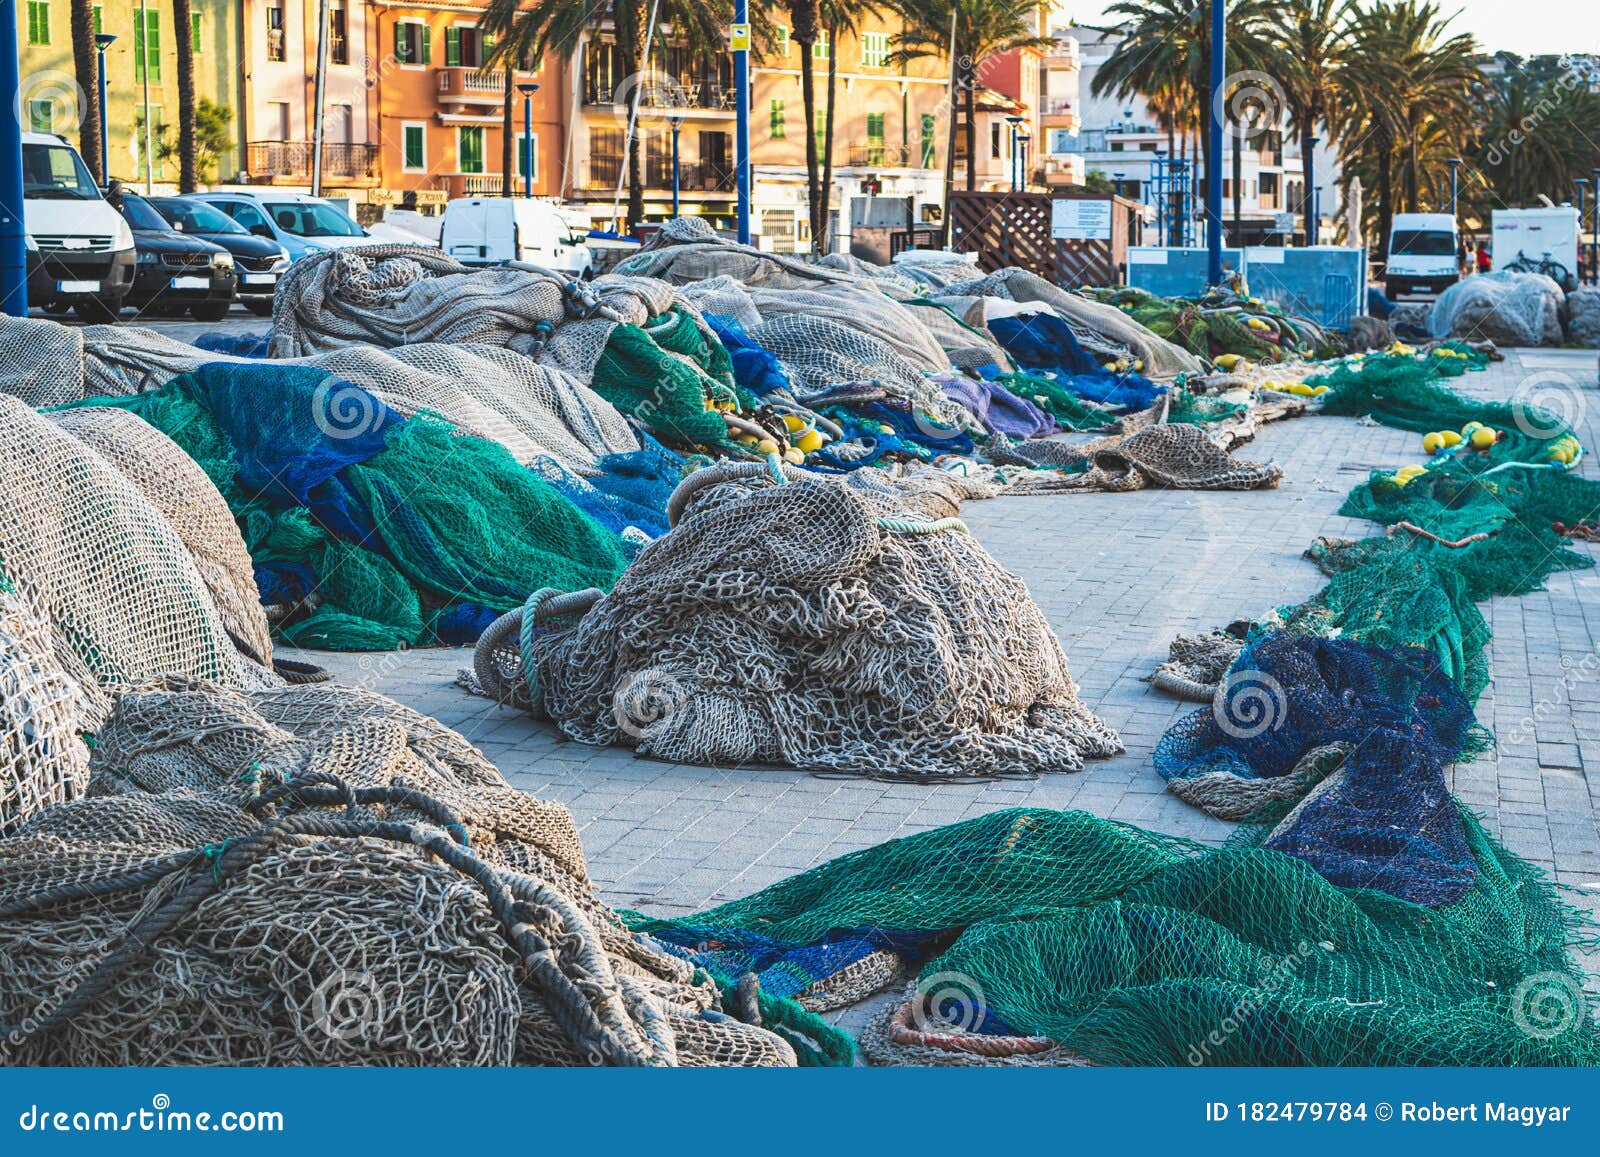 fishing nets in port blue and green color not in use stacked together for renovation